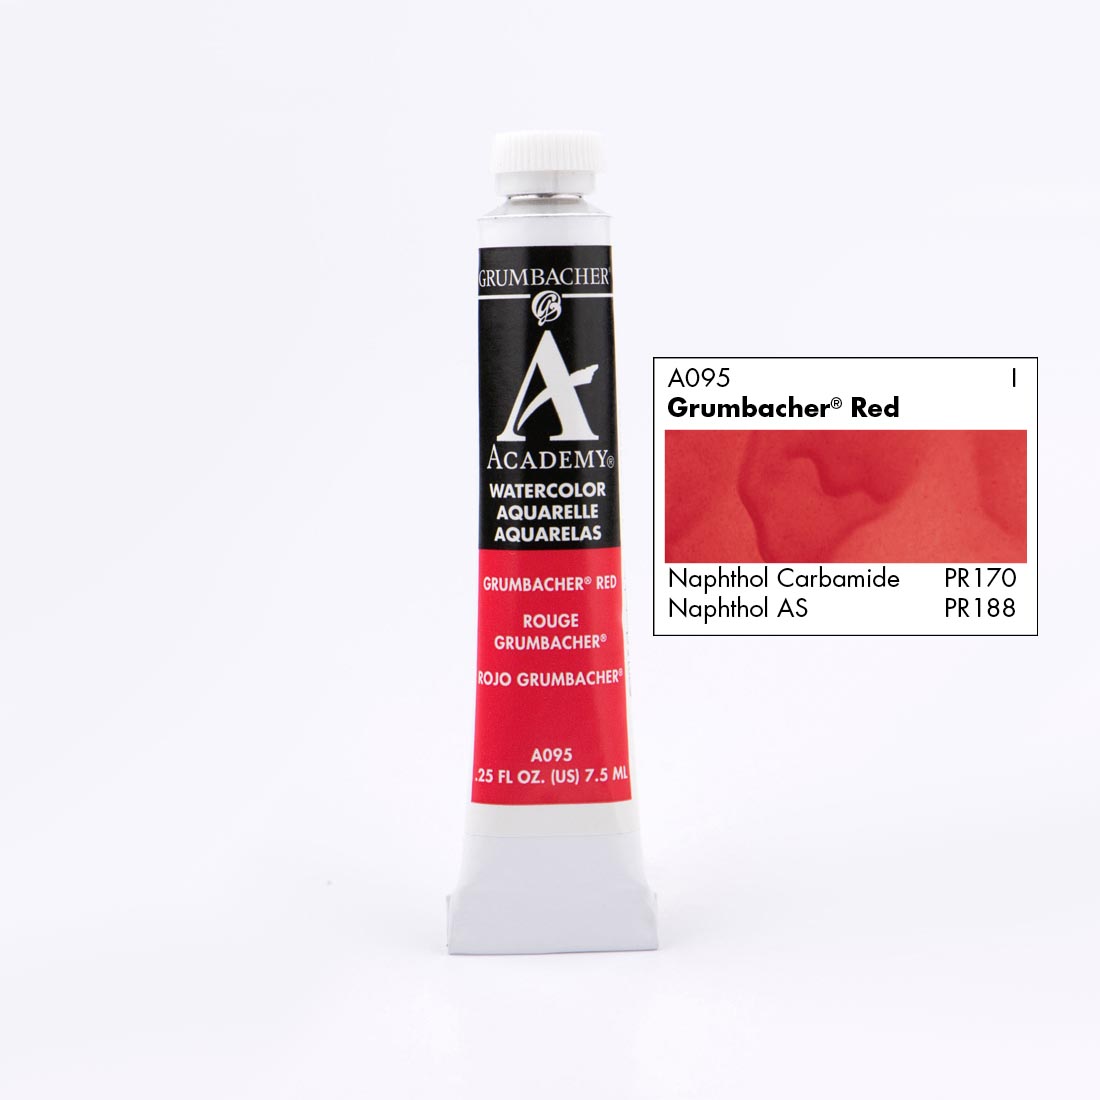 Tube of Grumbacher Academy Watercolor beside Grumbacher Red color swatch